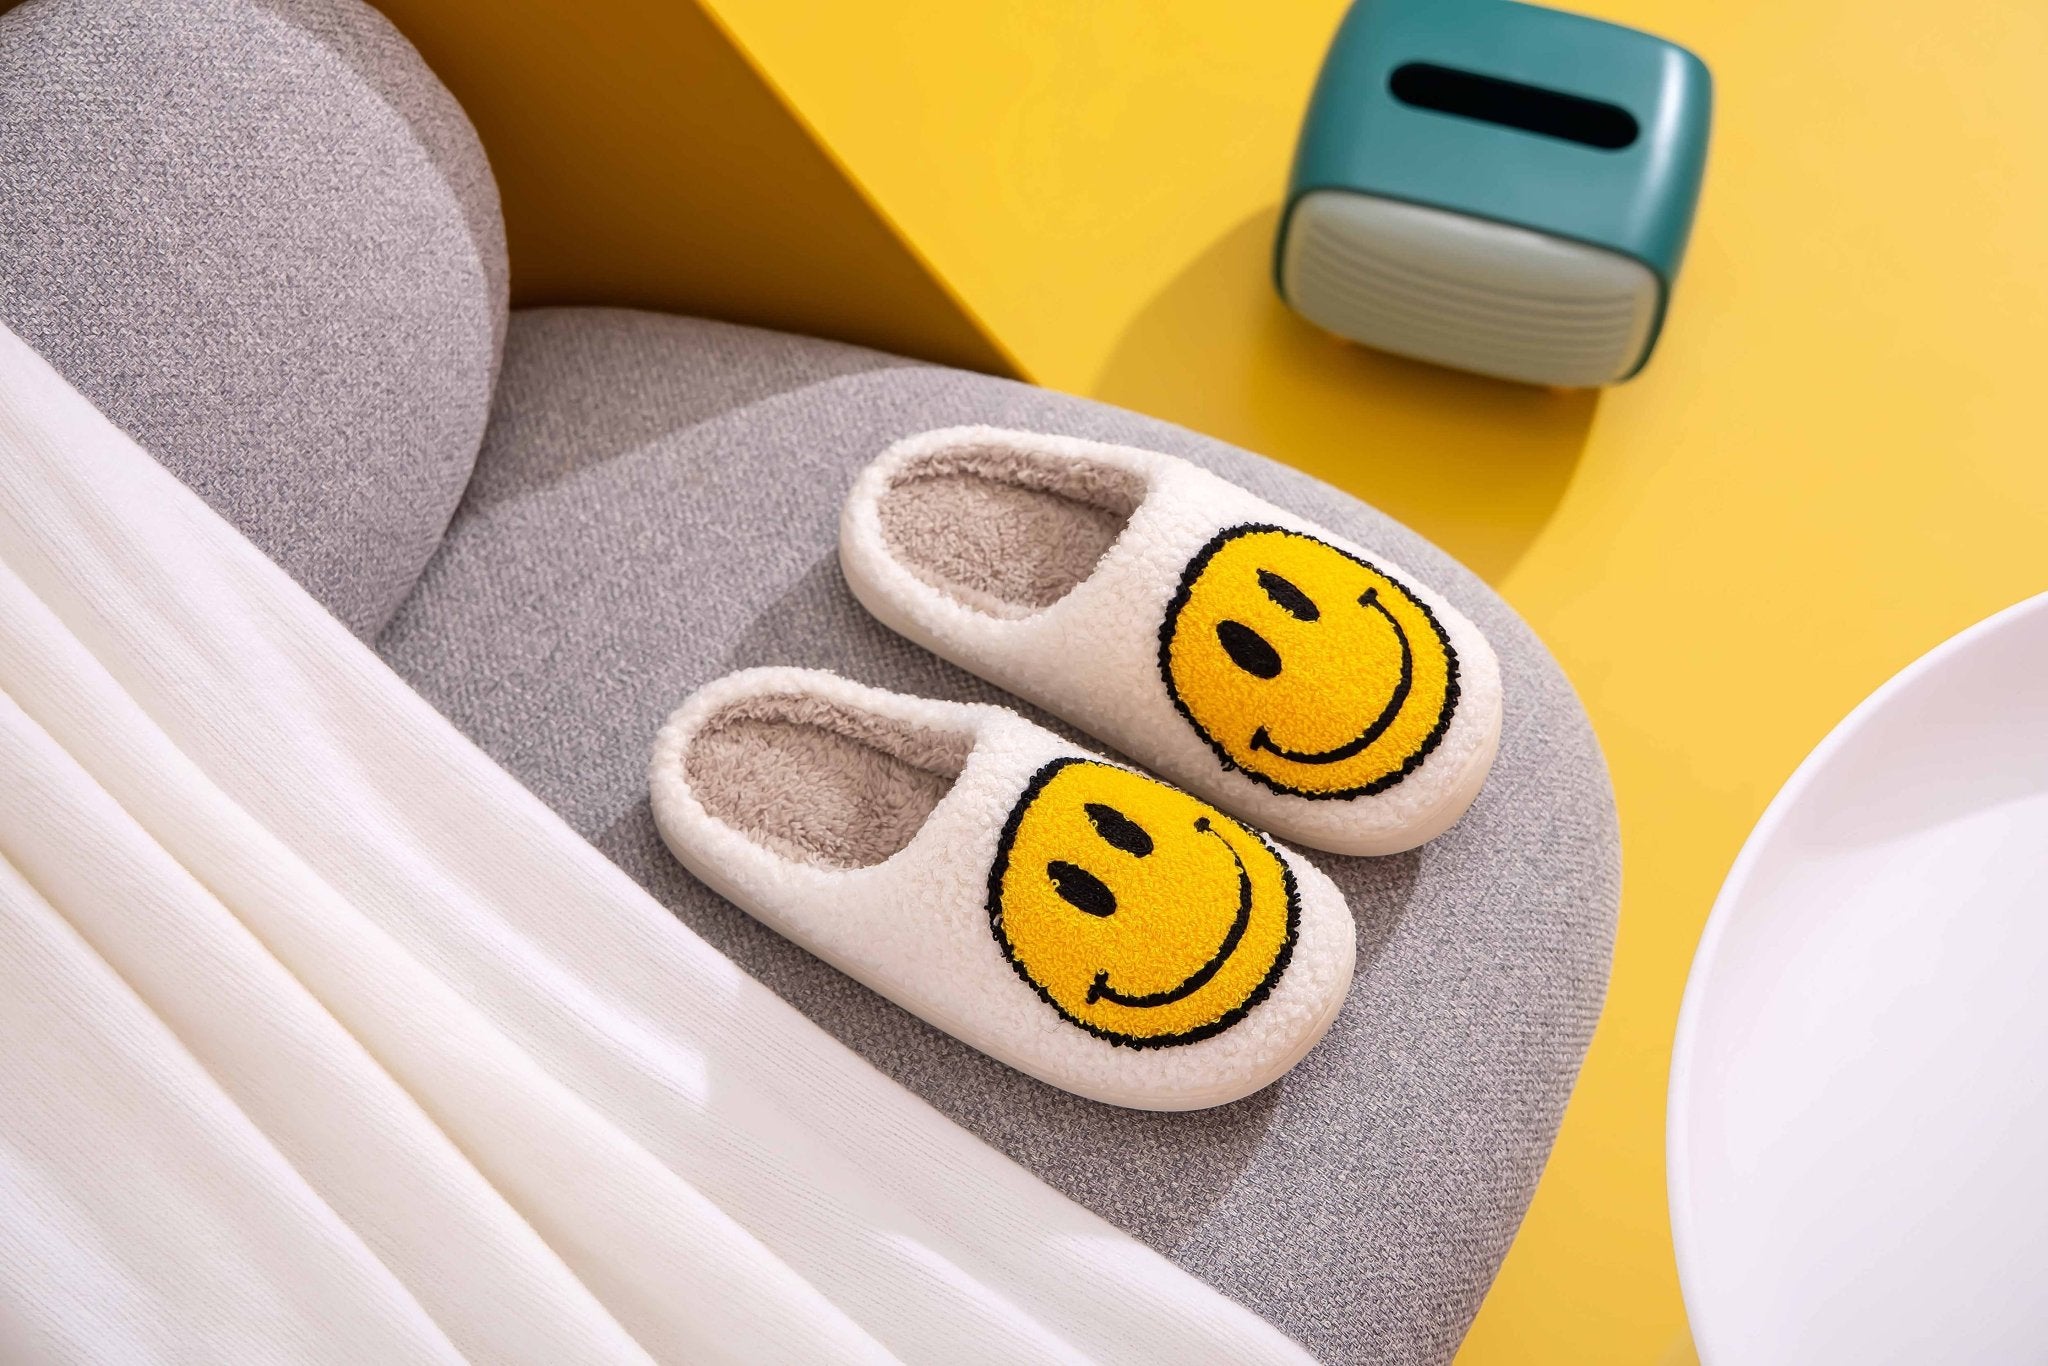 Smiley Face Fluffy Slippers (White) - Small (5.5-6.5/37-38) - Slippers